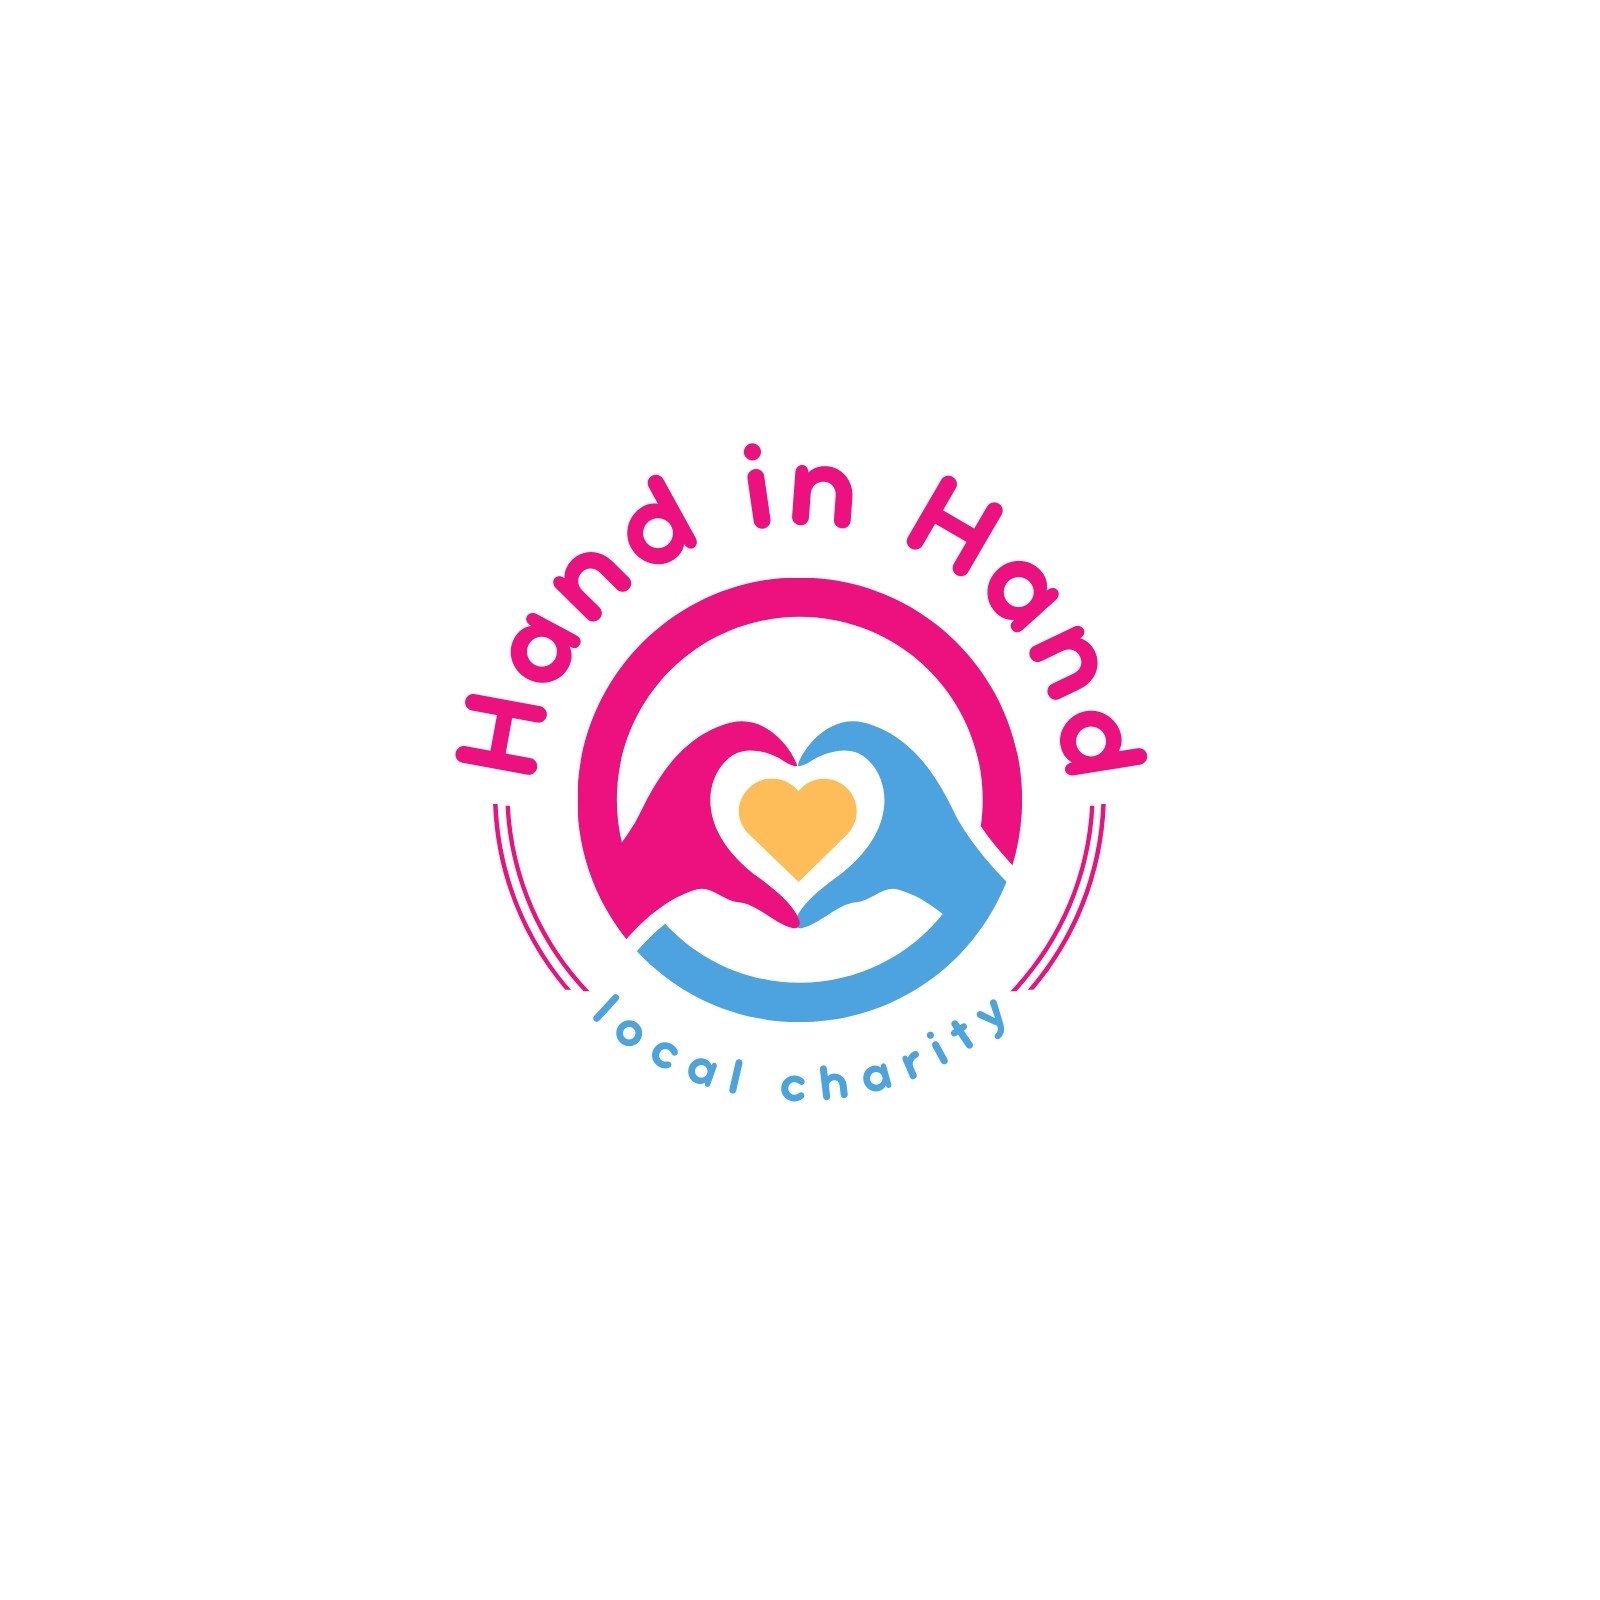 Our Barts Charity logo - Barts Charity